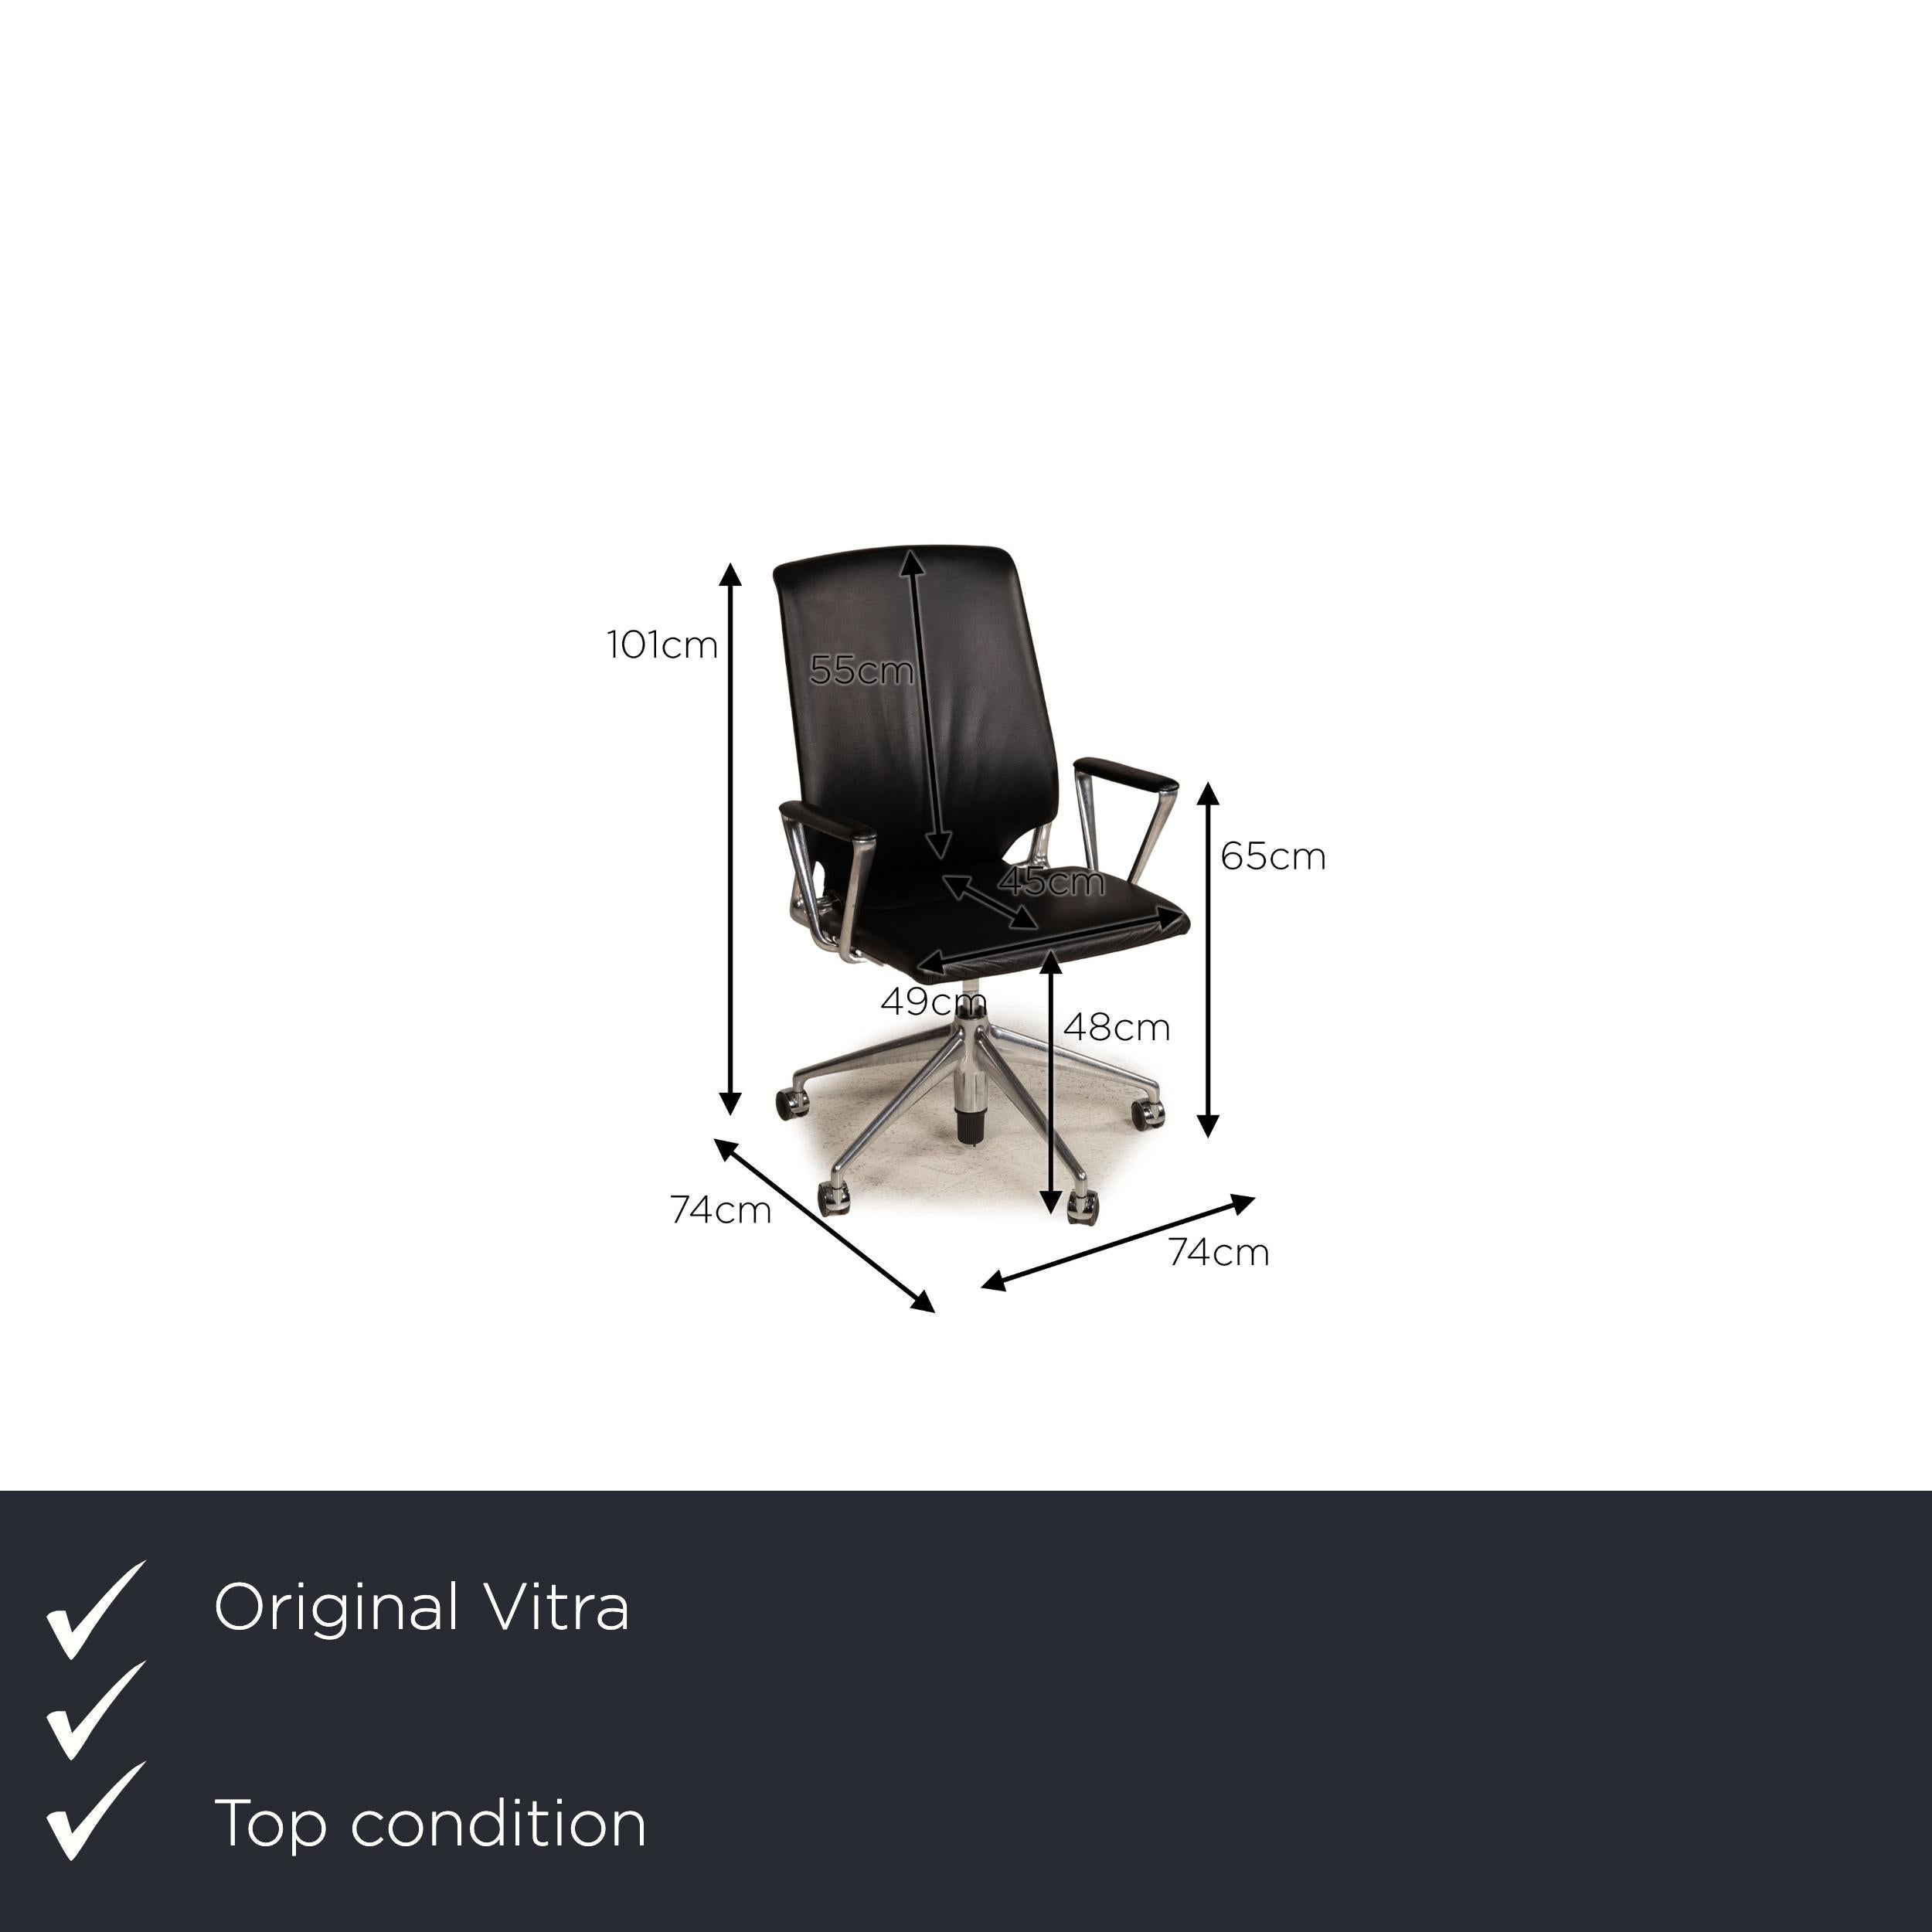 We present to you a Vitra leather chair black office chair.

Product measurements in centimeters:

depth: 74
width: 74
height: 101
seat height: 48
rest height: 65
seat depth: 45
seat width: 49
back height: 55.


 